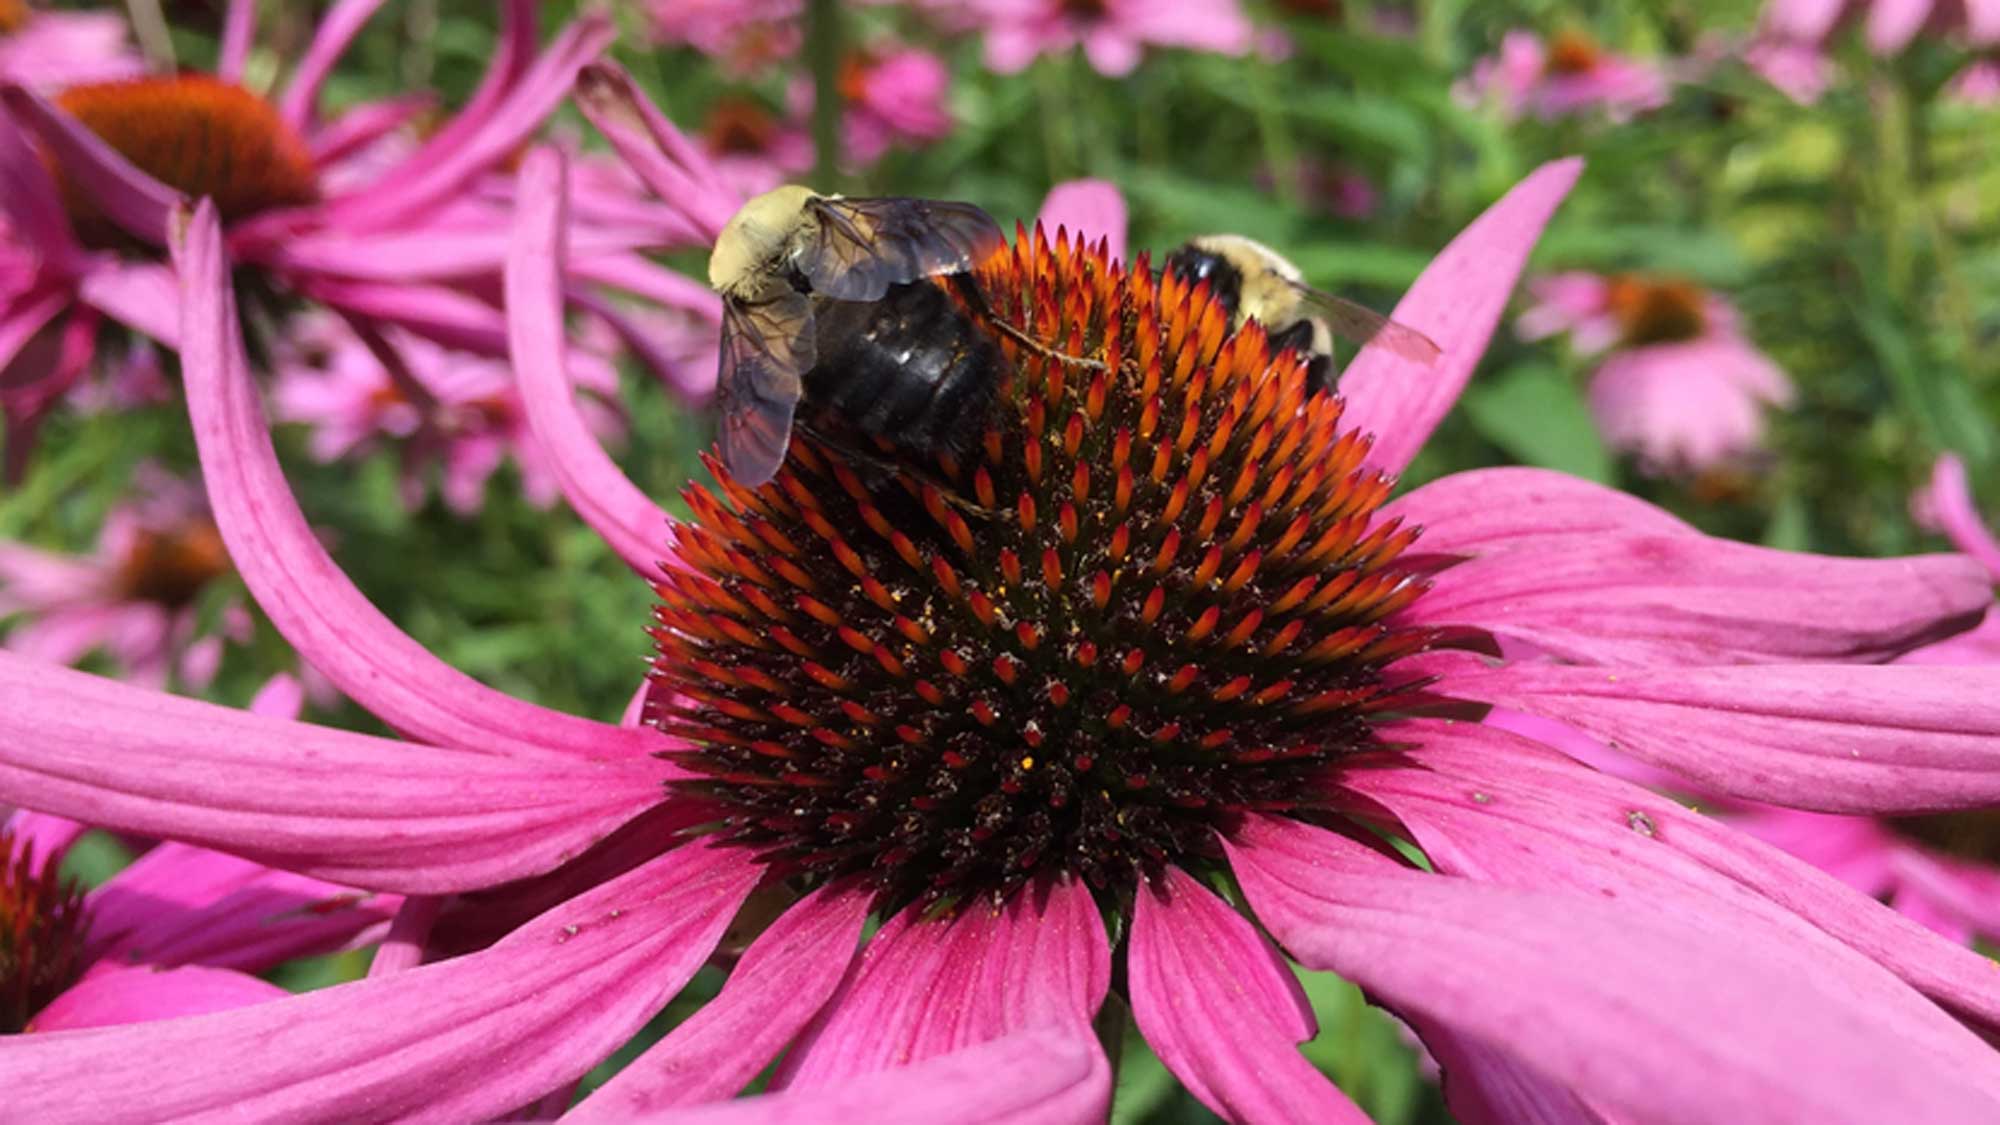 Photograph of two bees on an echinacea flower.